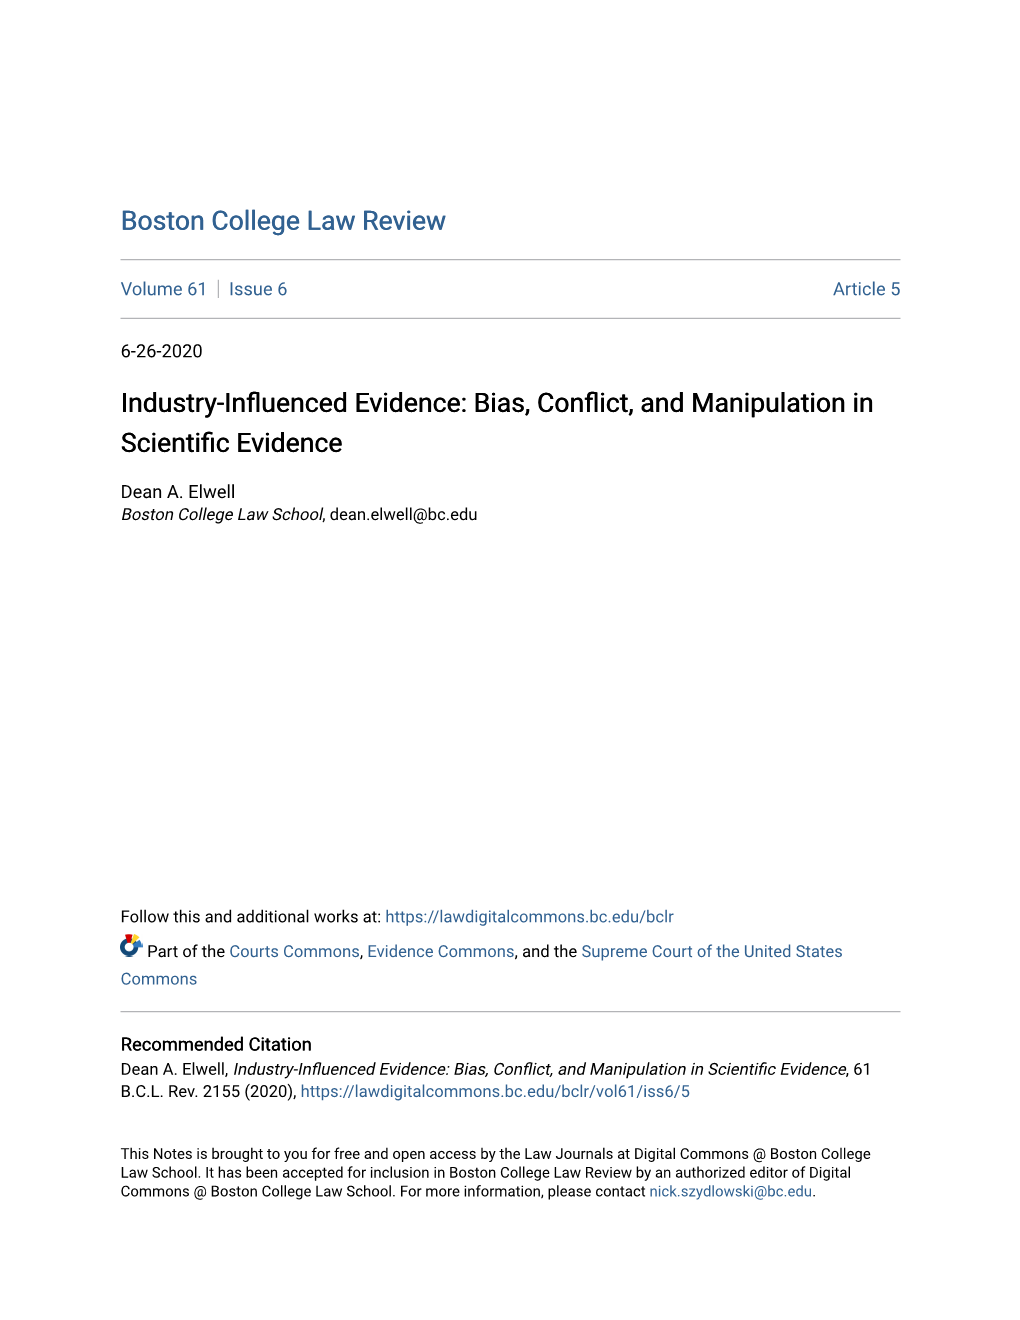 Bias, Conflict, and Manipulation in Scientific Evidence